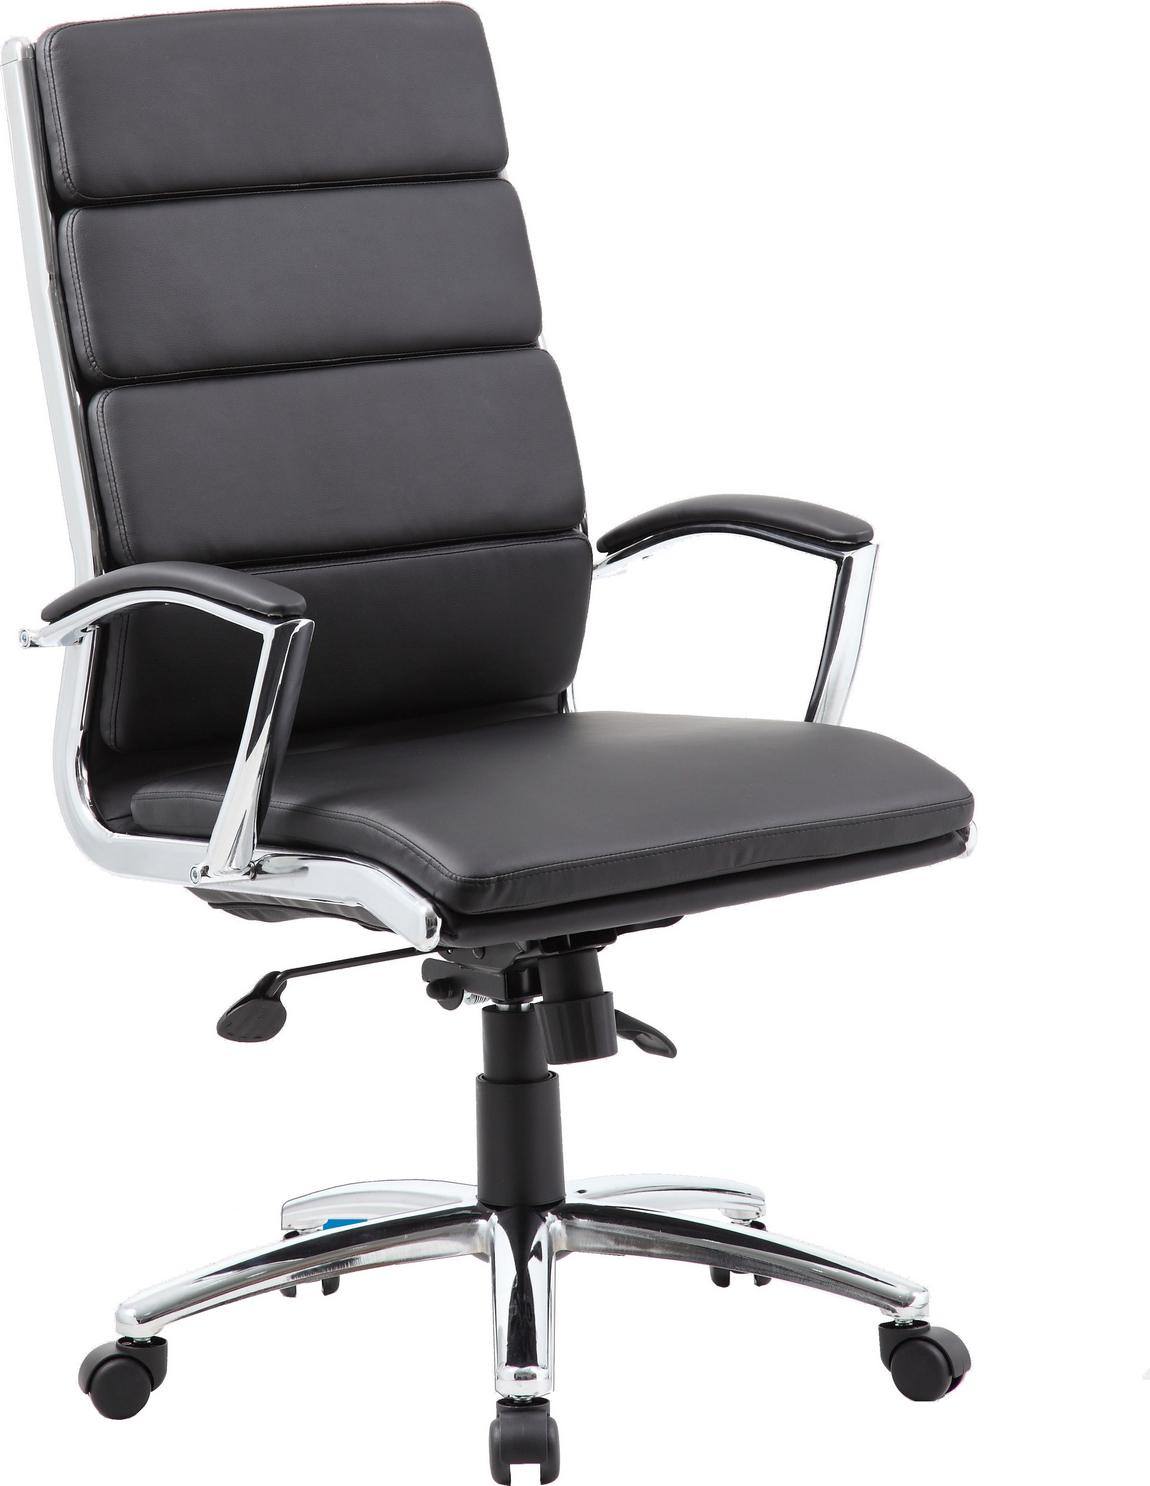 Modern Black Conference Room Chair : Express Office Furniture